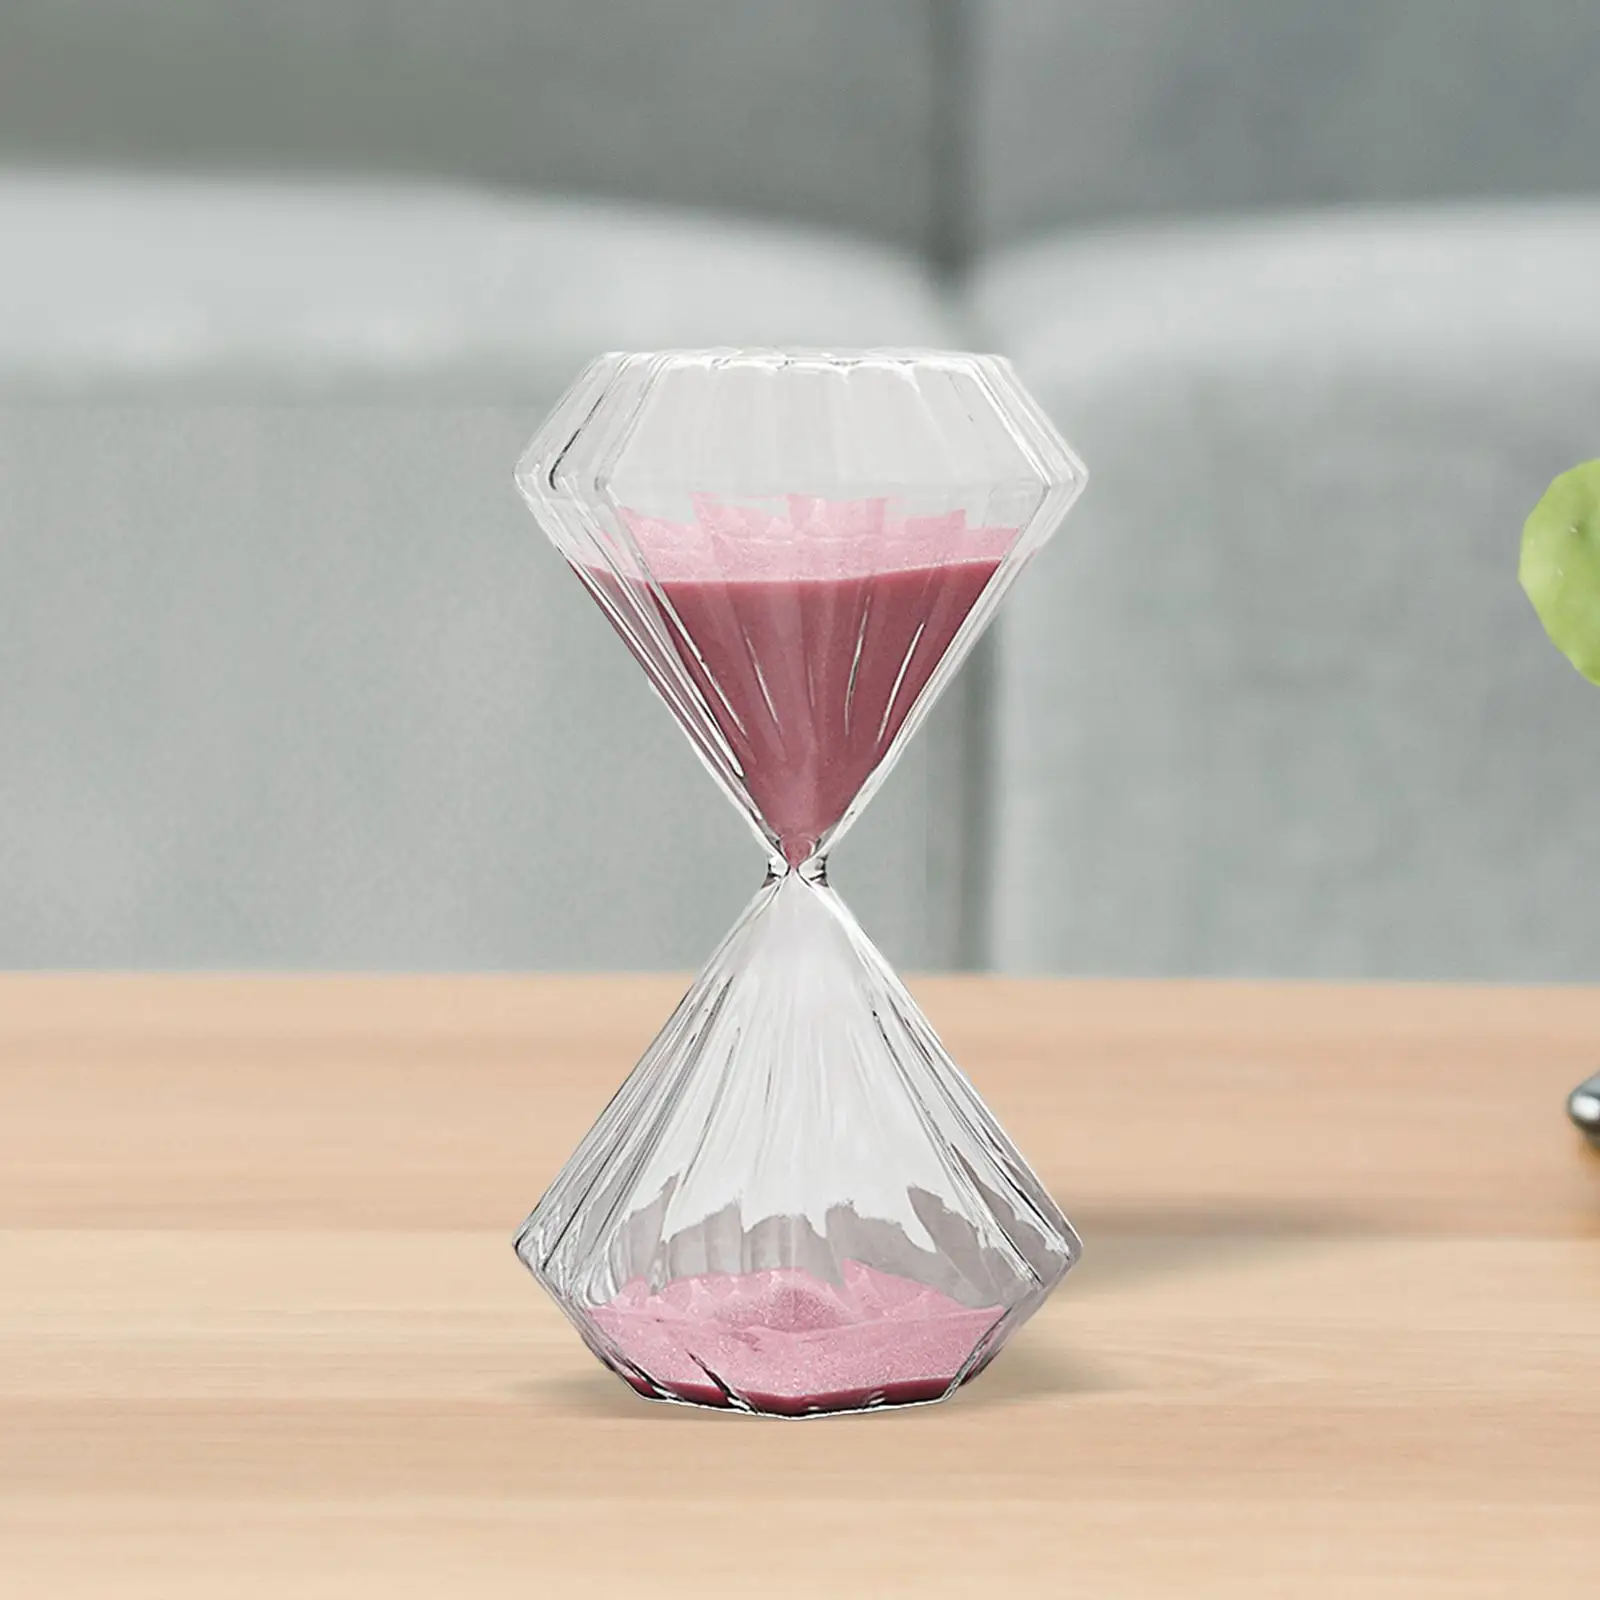 Sand Glass Timer Hourglass 30 Minutes Pink Sand Bathroom Accessory Decorative Study Timer Yoga Timer Hour Glasses for Bedroom